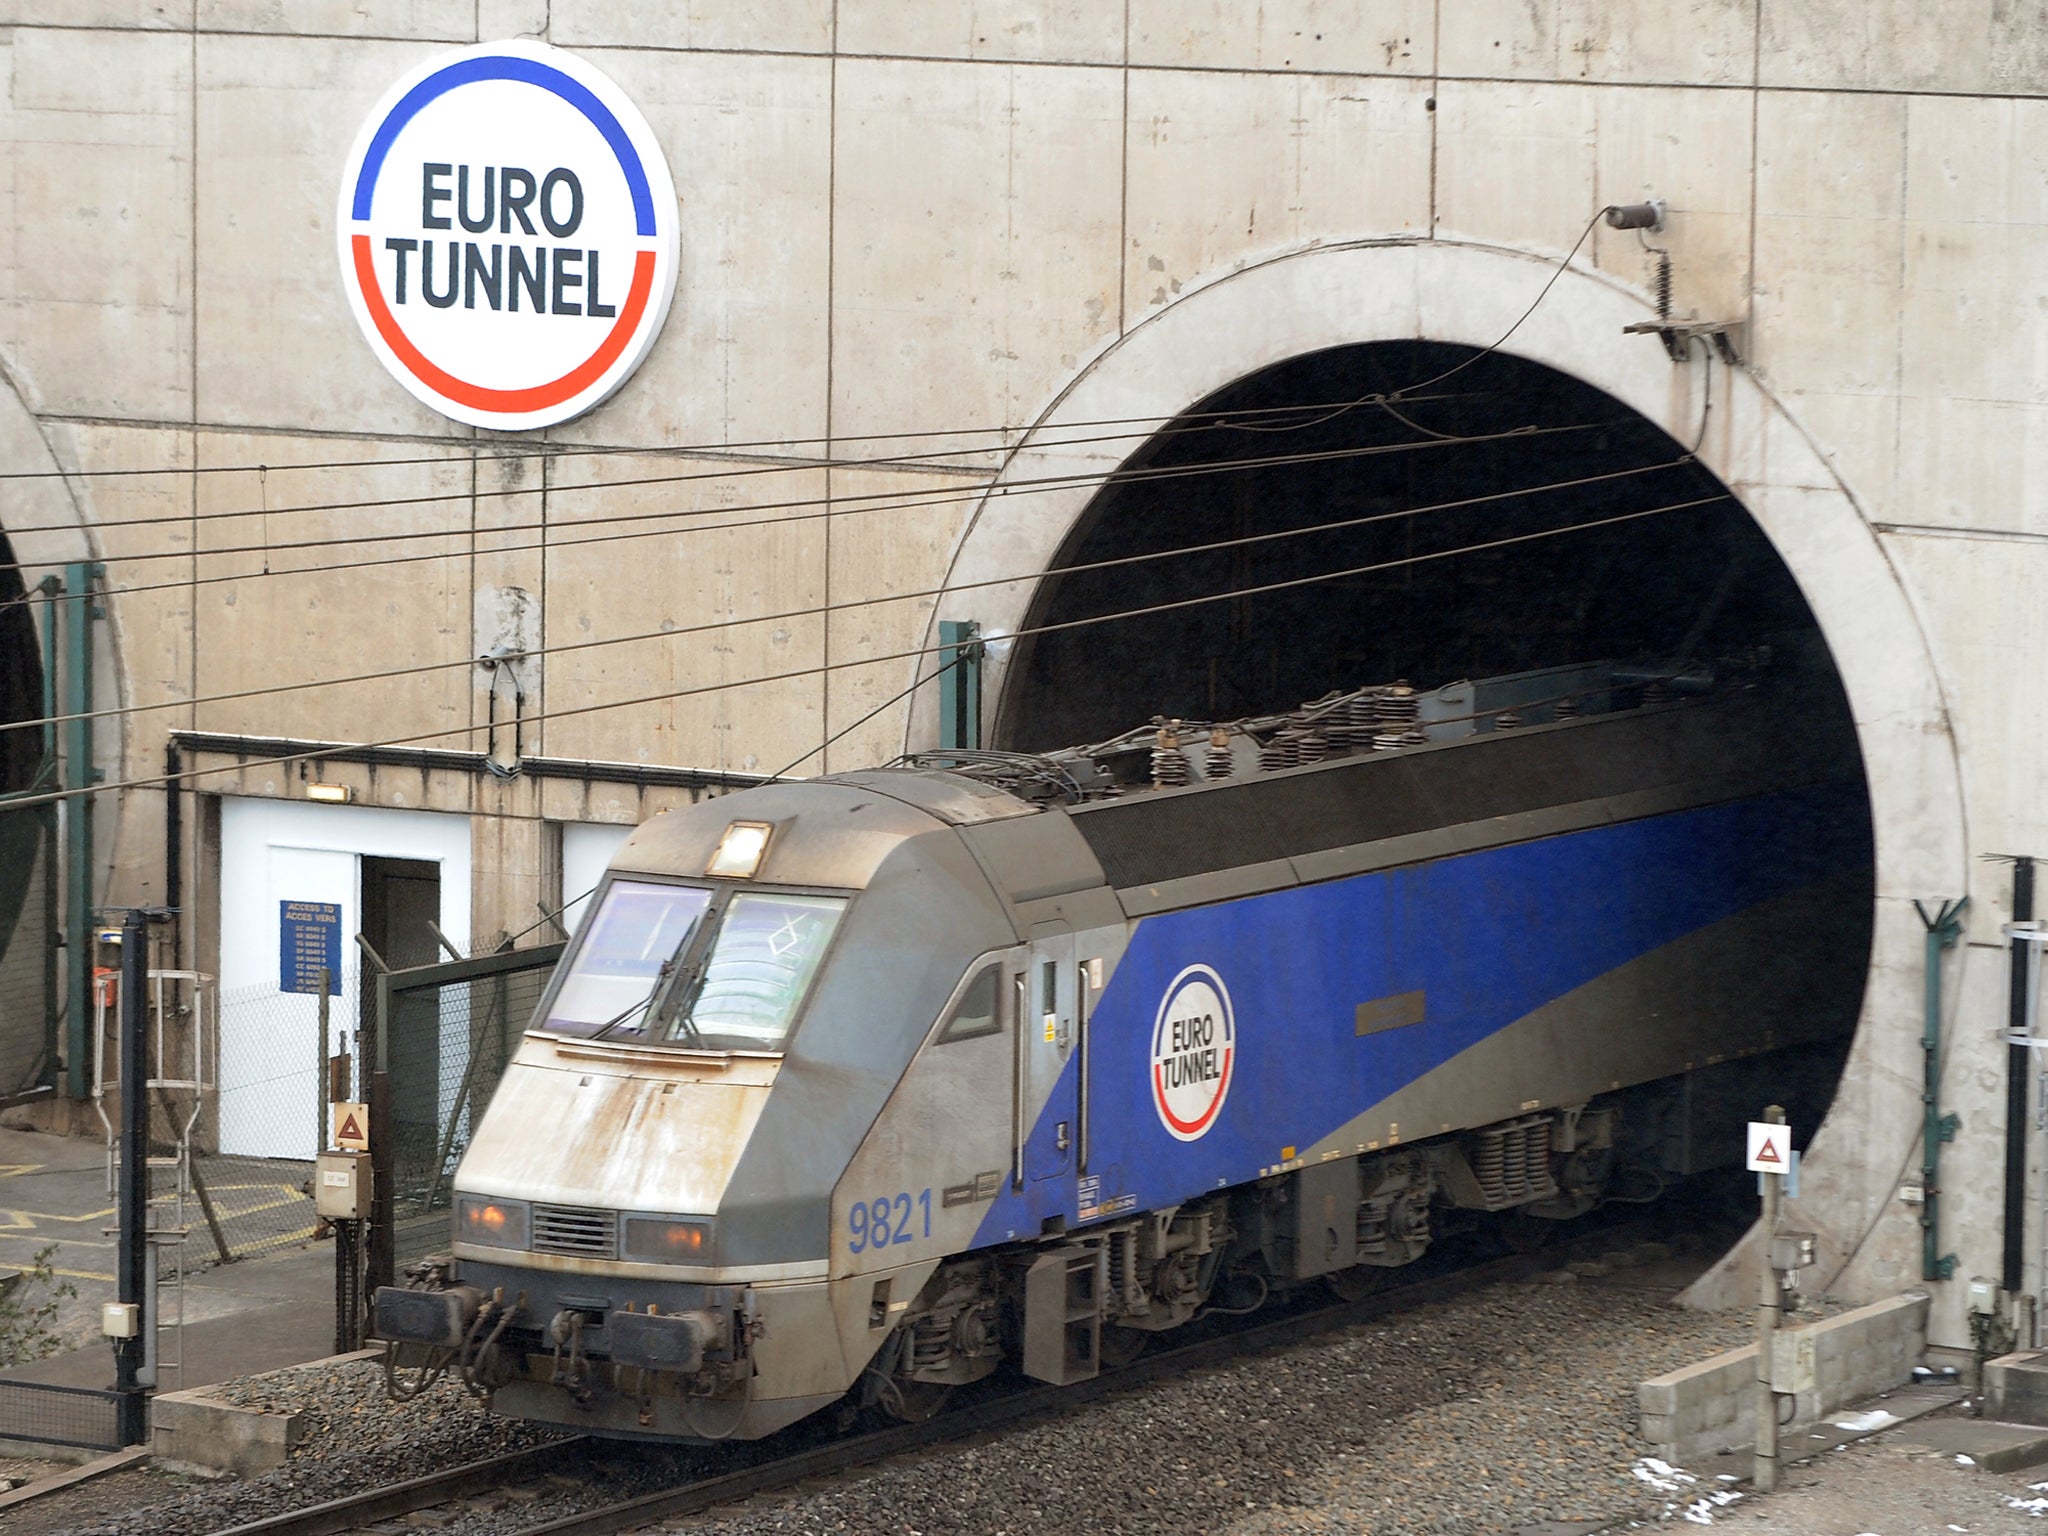 The tunnel could have been similar in design to the channel tunnel link to France